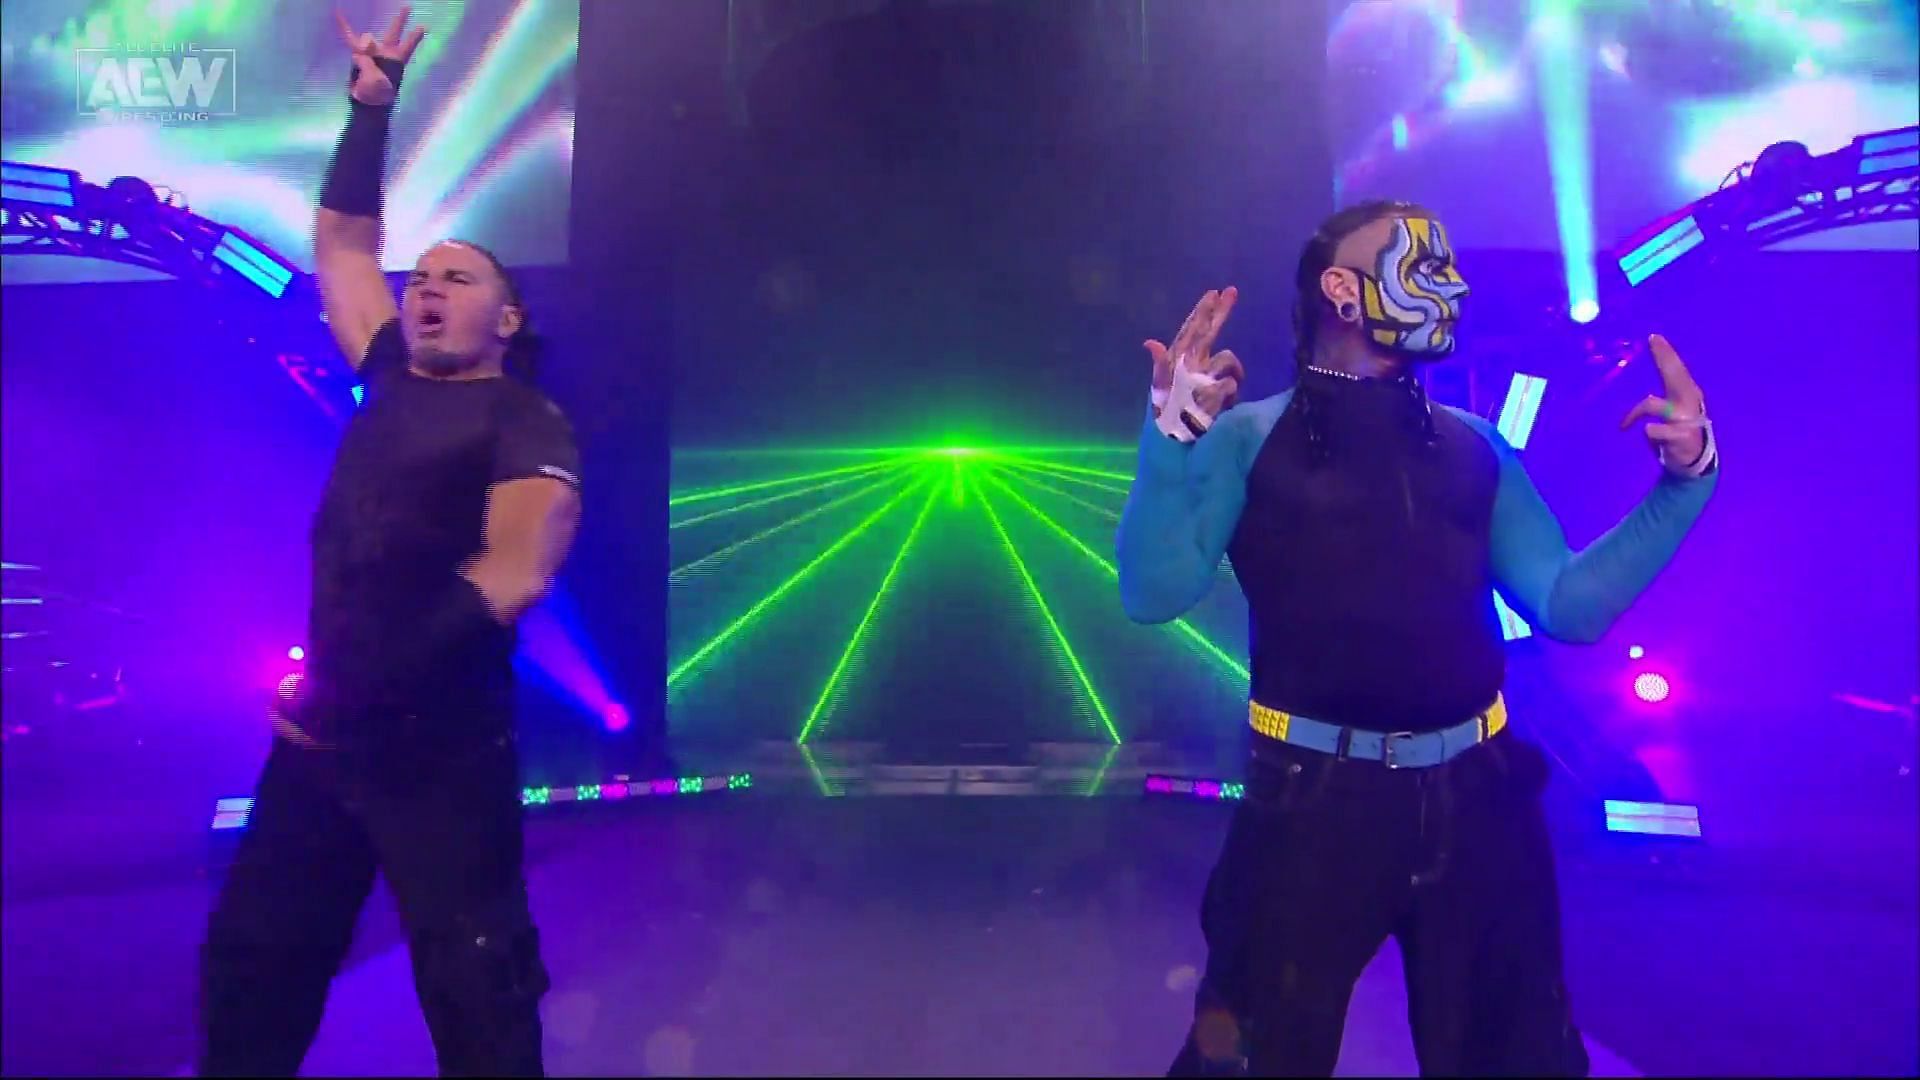 Matt and Jeff Hardy making their way to the ring